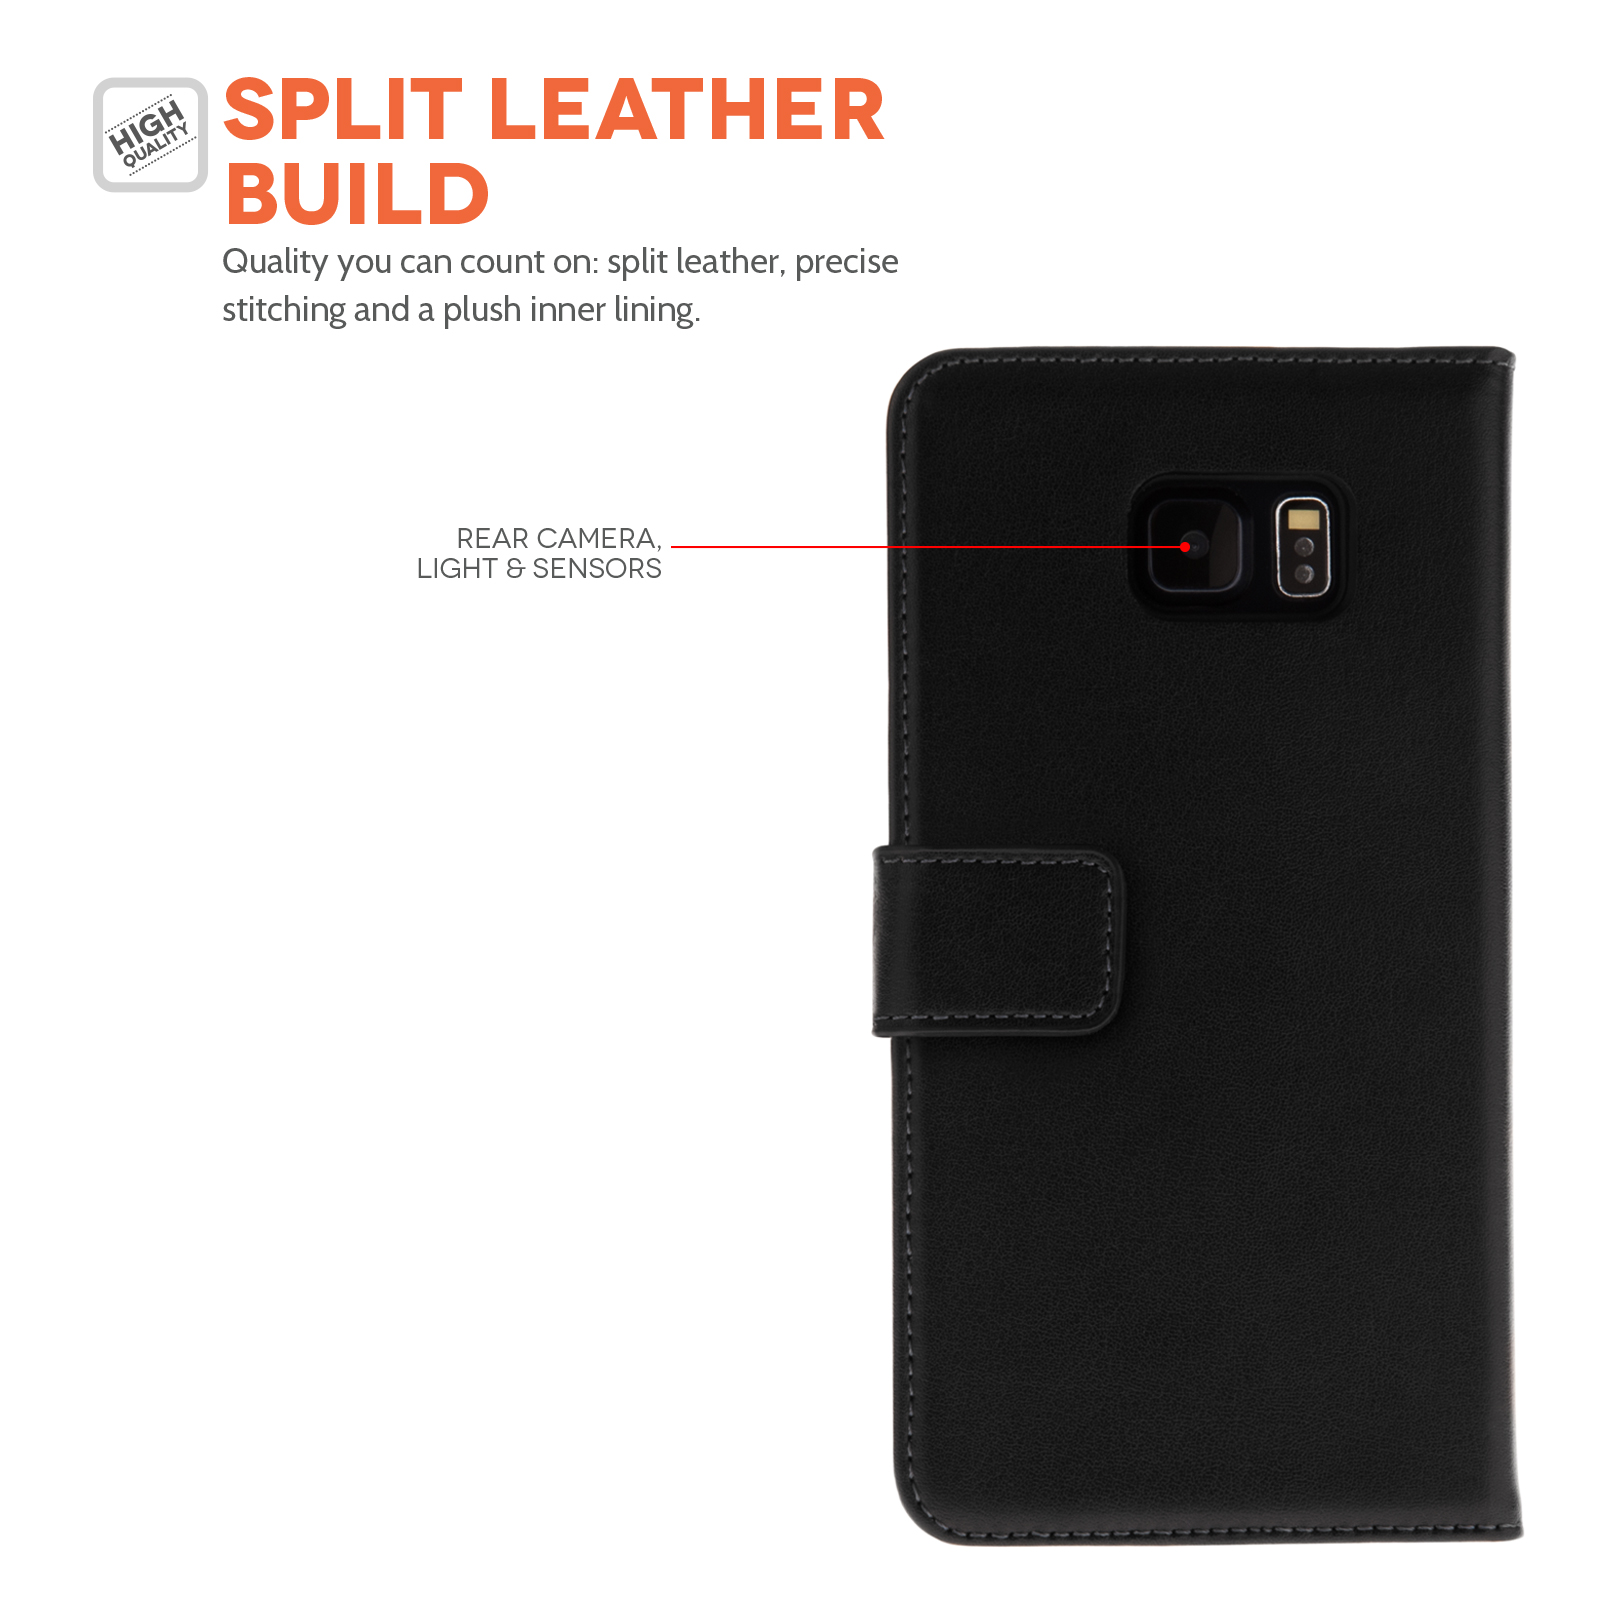 Yousave Accessories Samsung Galaxy S6 Edge Plus Real Leather Wallet Case -Black